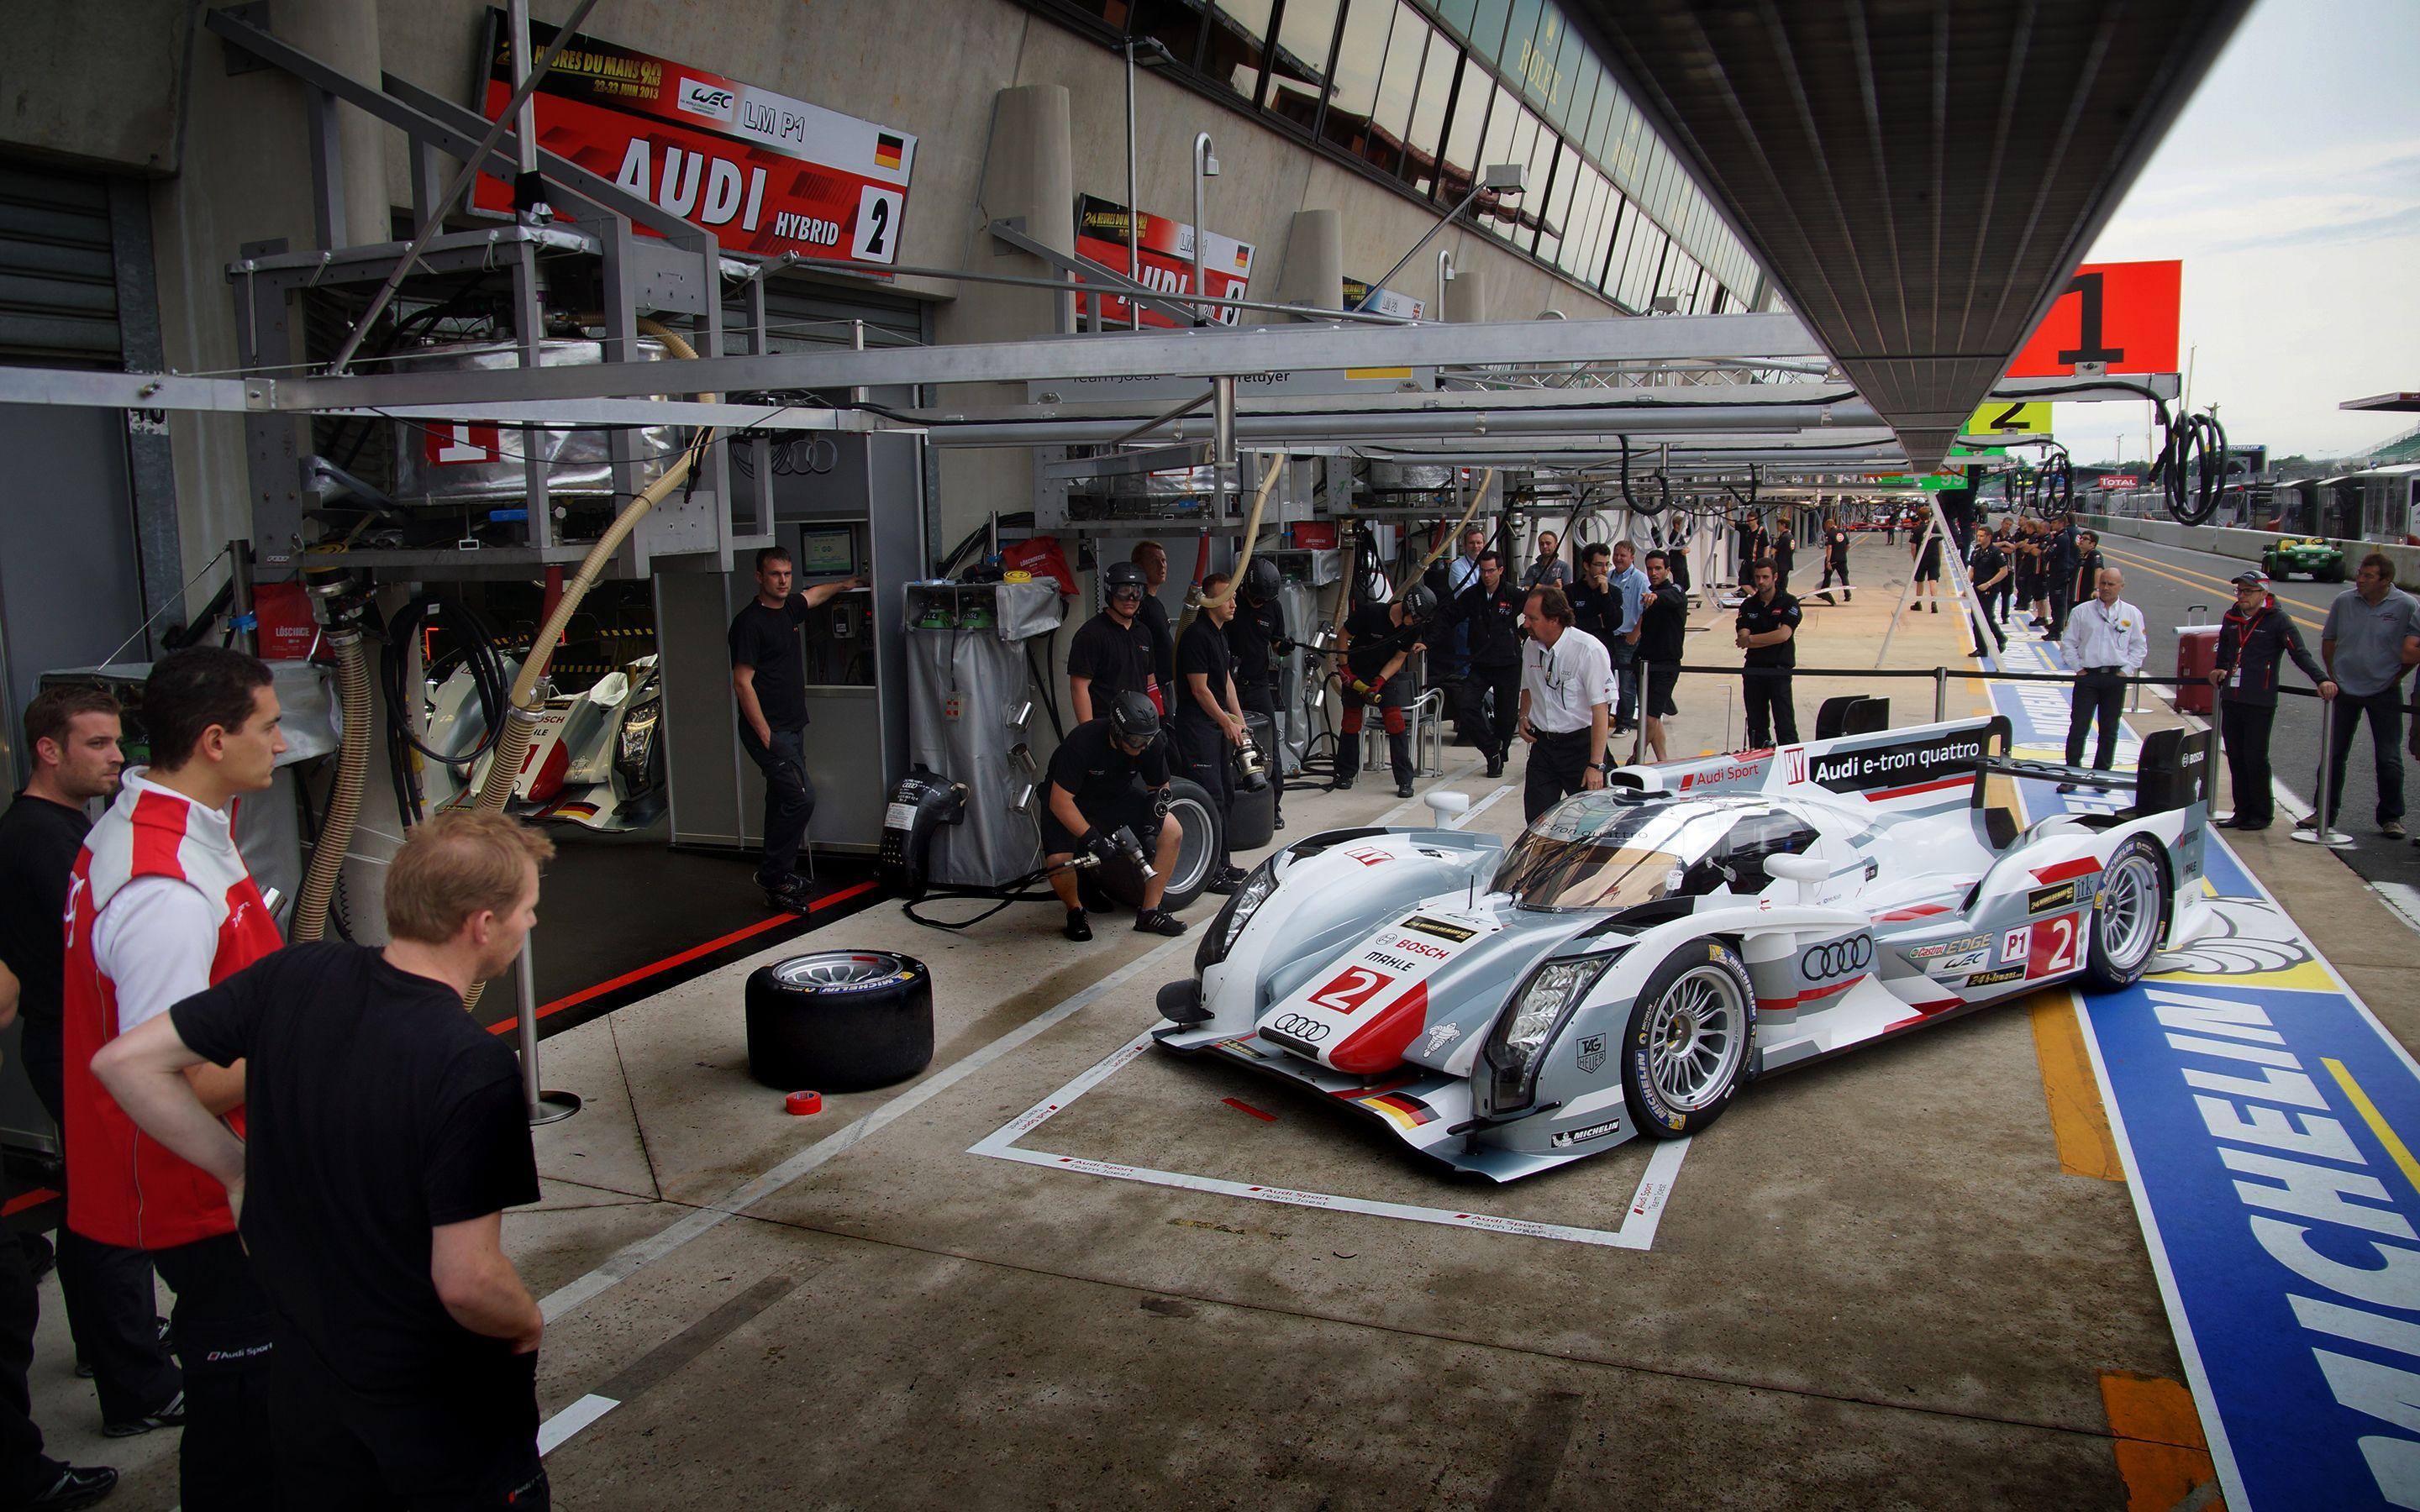 WotD: Pit Practice at the 24 Hours of Le Mans